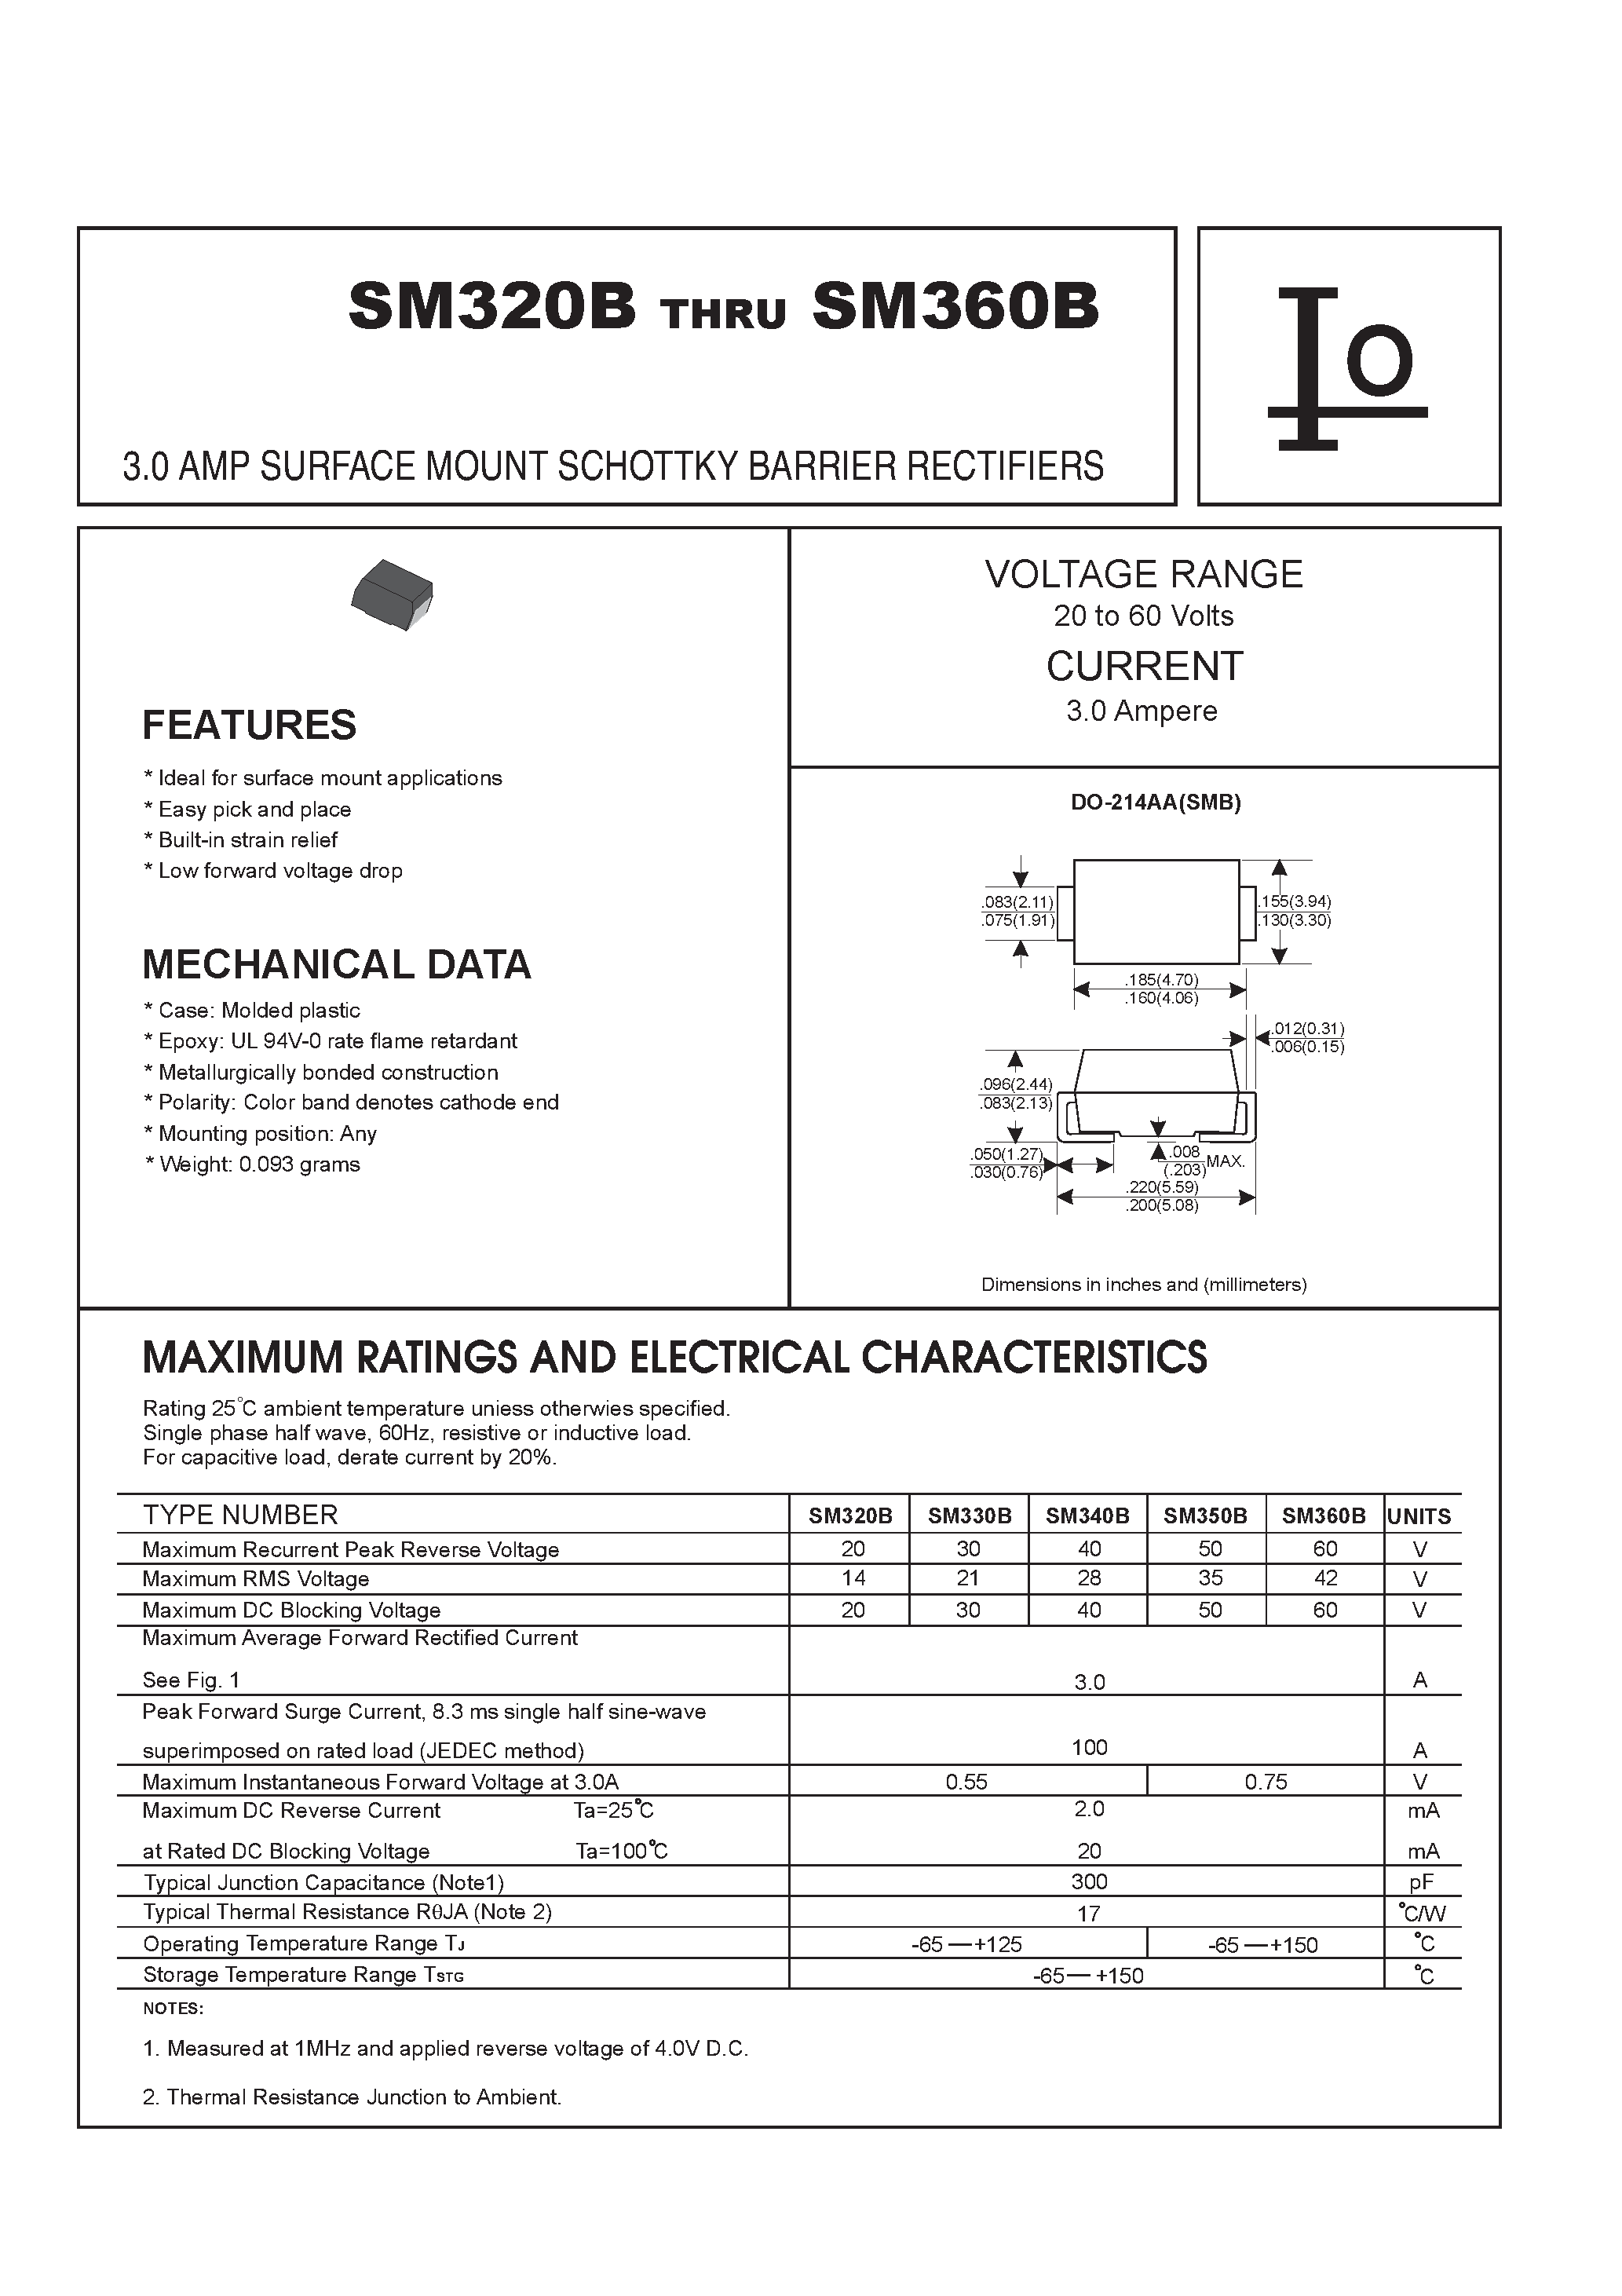 Datasheet SM340B - 3.0 AMP SURFACE MOUNT SCHOTTKY BARRIER RECTIFIERS page 1